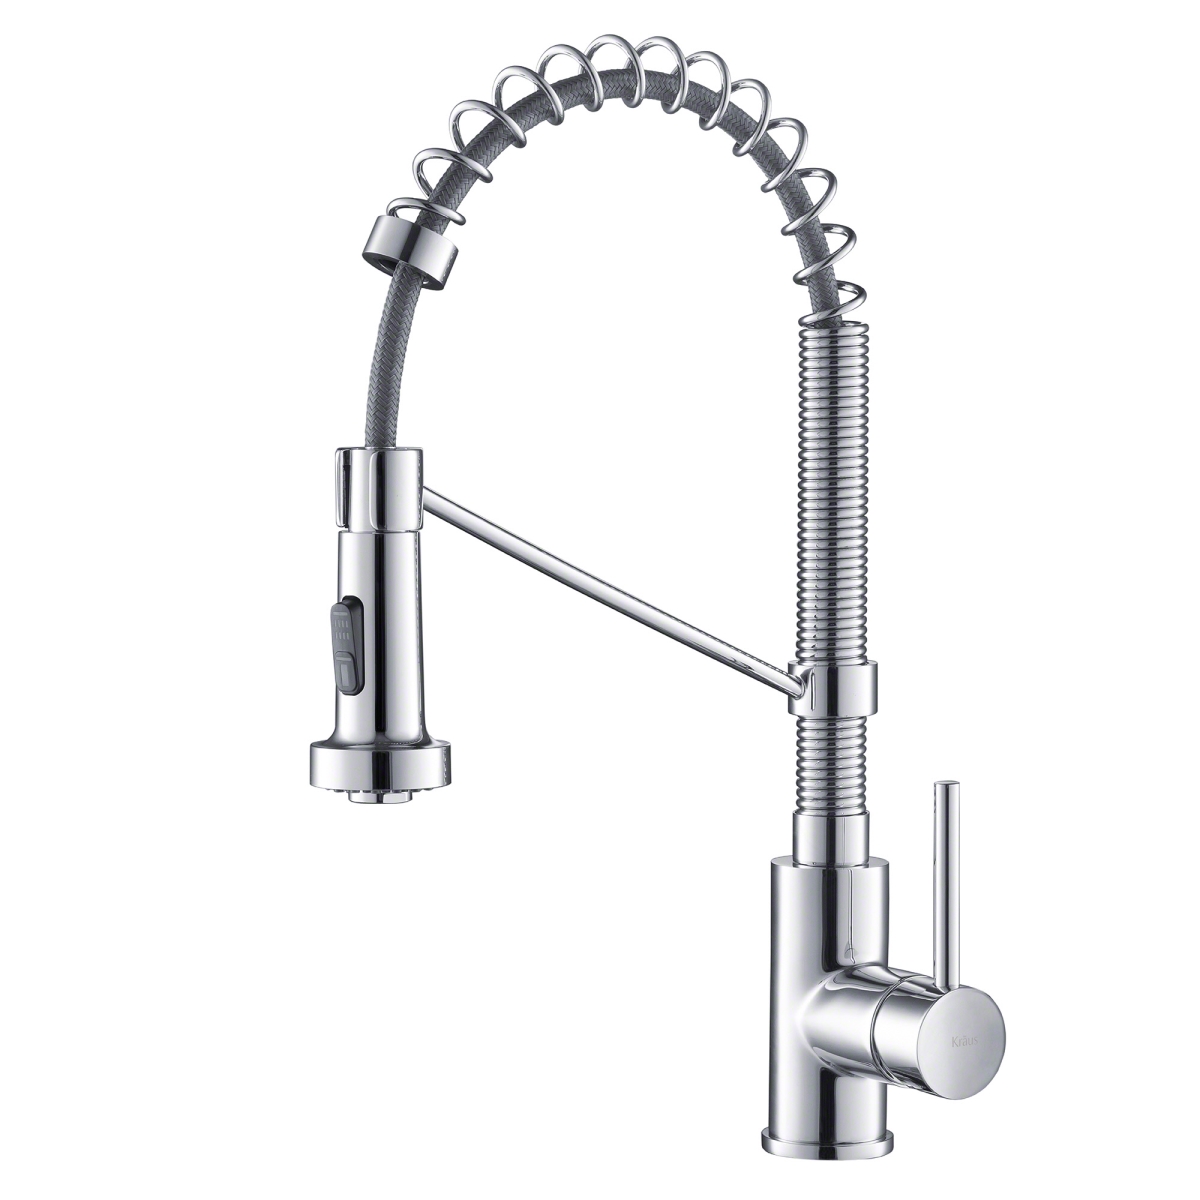 Kraus Kpf-1610ch 18 In. Single Handle Commercial Kitchen Faucet With Dual Function Pull-down Sprayhead, Chrome